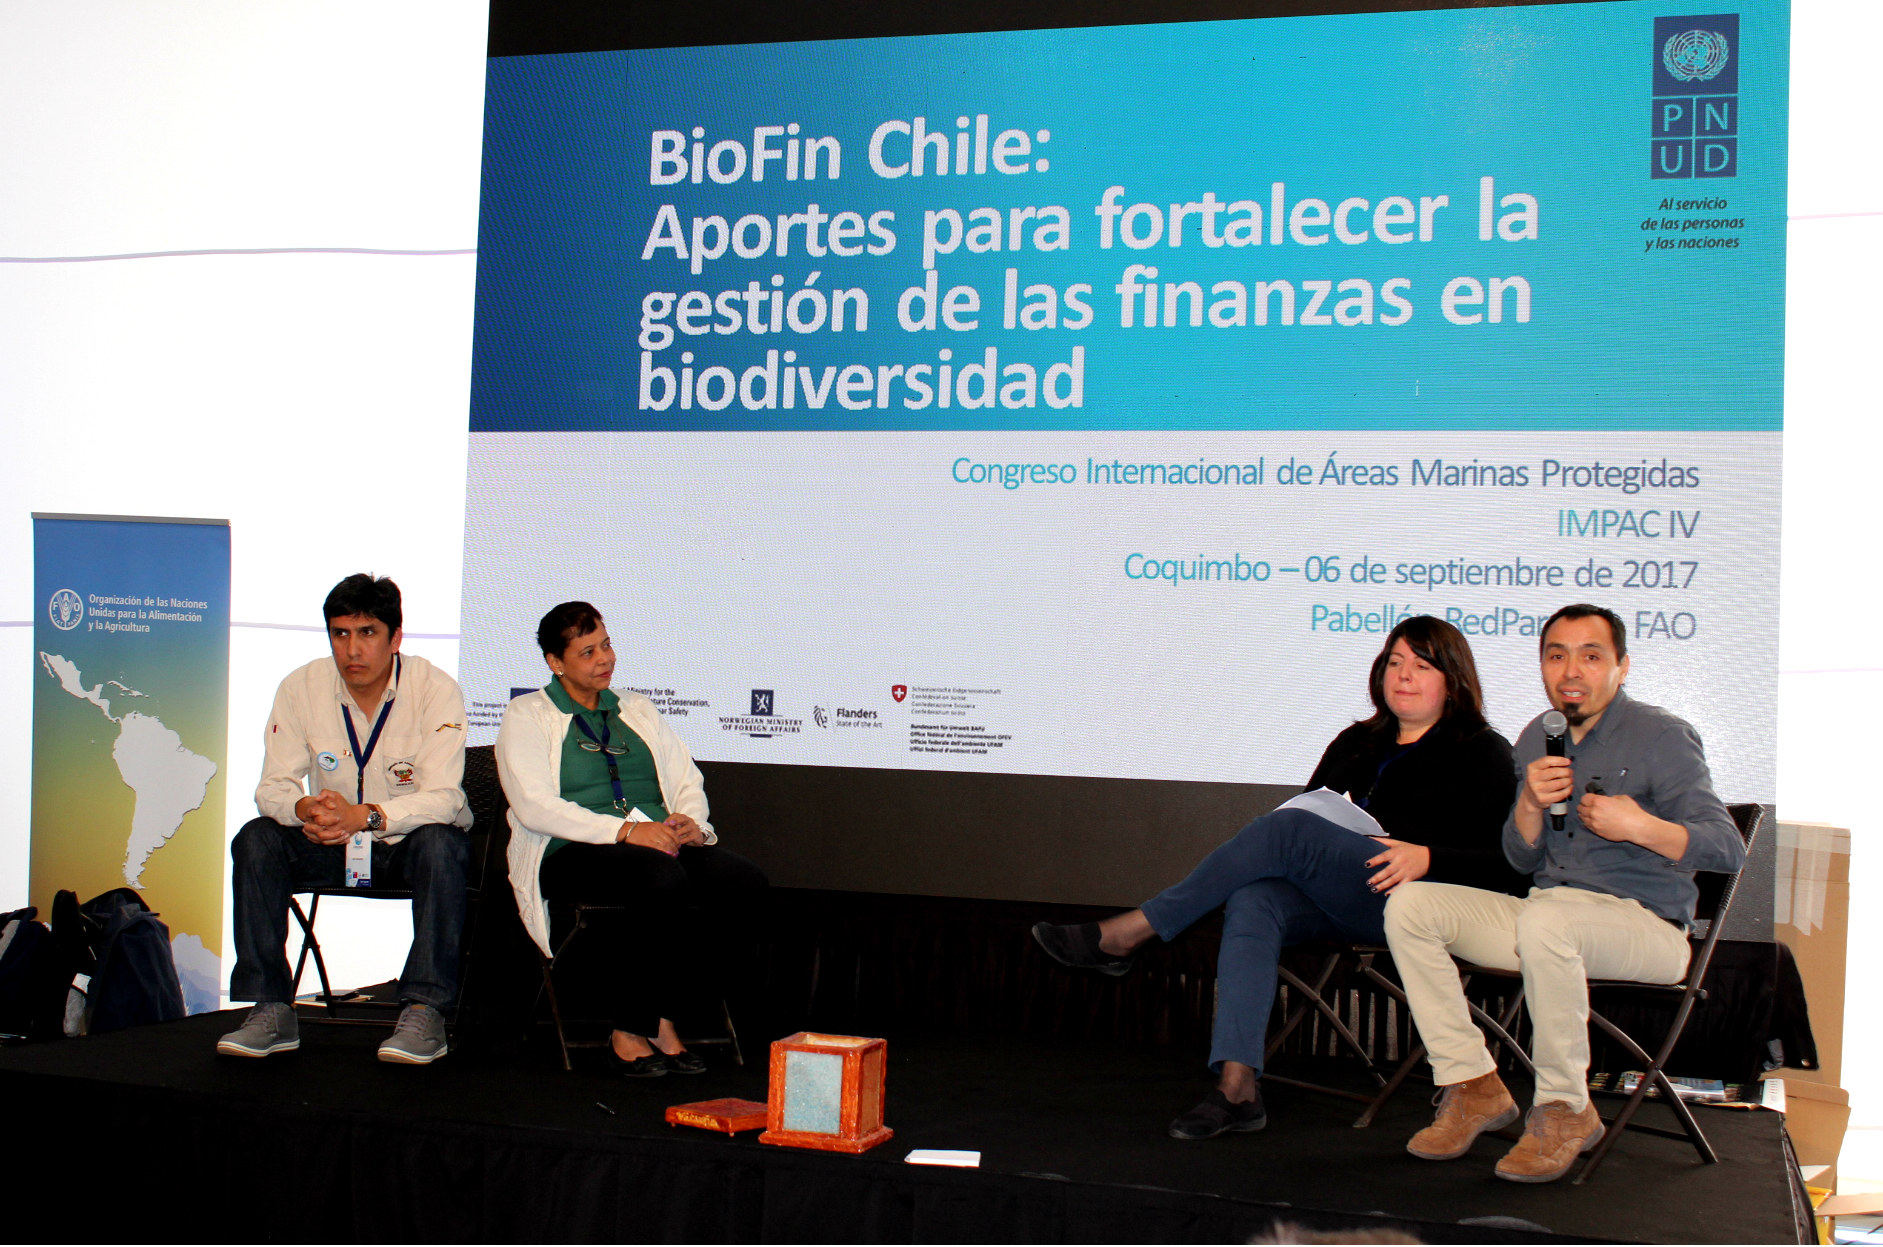 BIOFIN Chile and Cuba present financing strategies during the International Marine Protected Areas Congress IMPAC 4